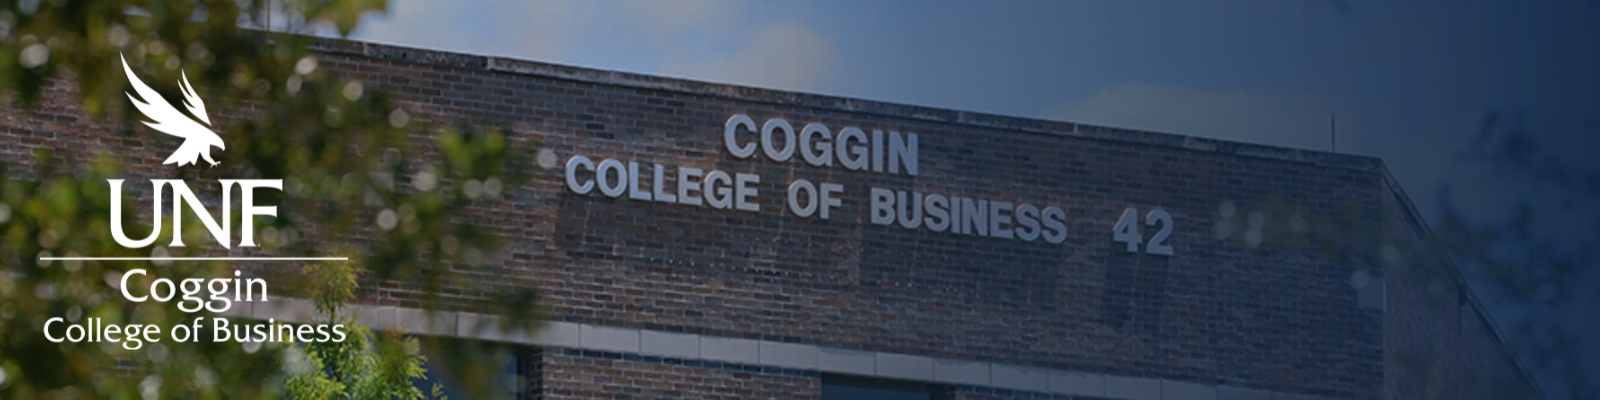 Coggin College of Business Building with blue gradient and UNF Coggin College of Business logo